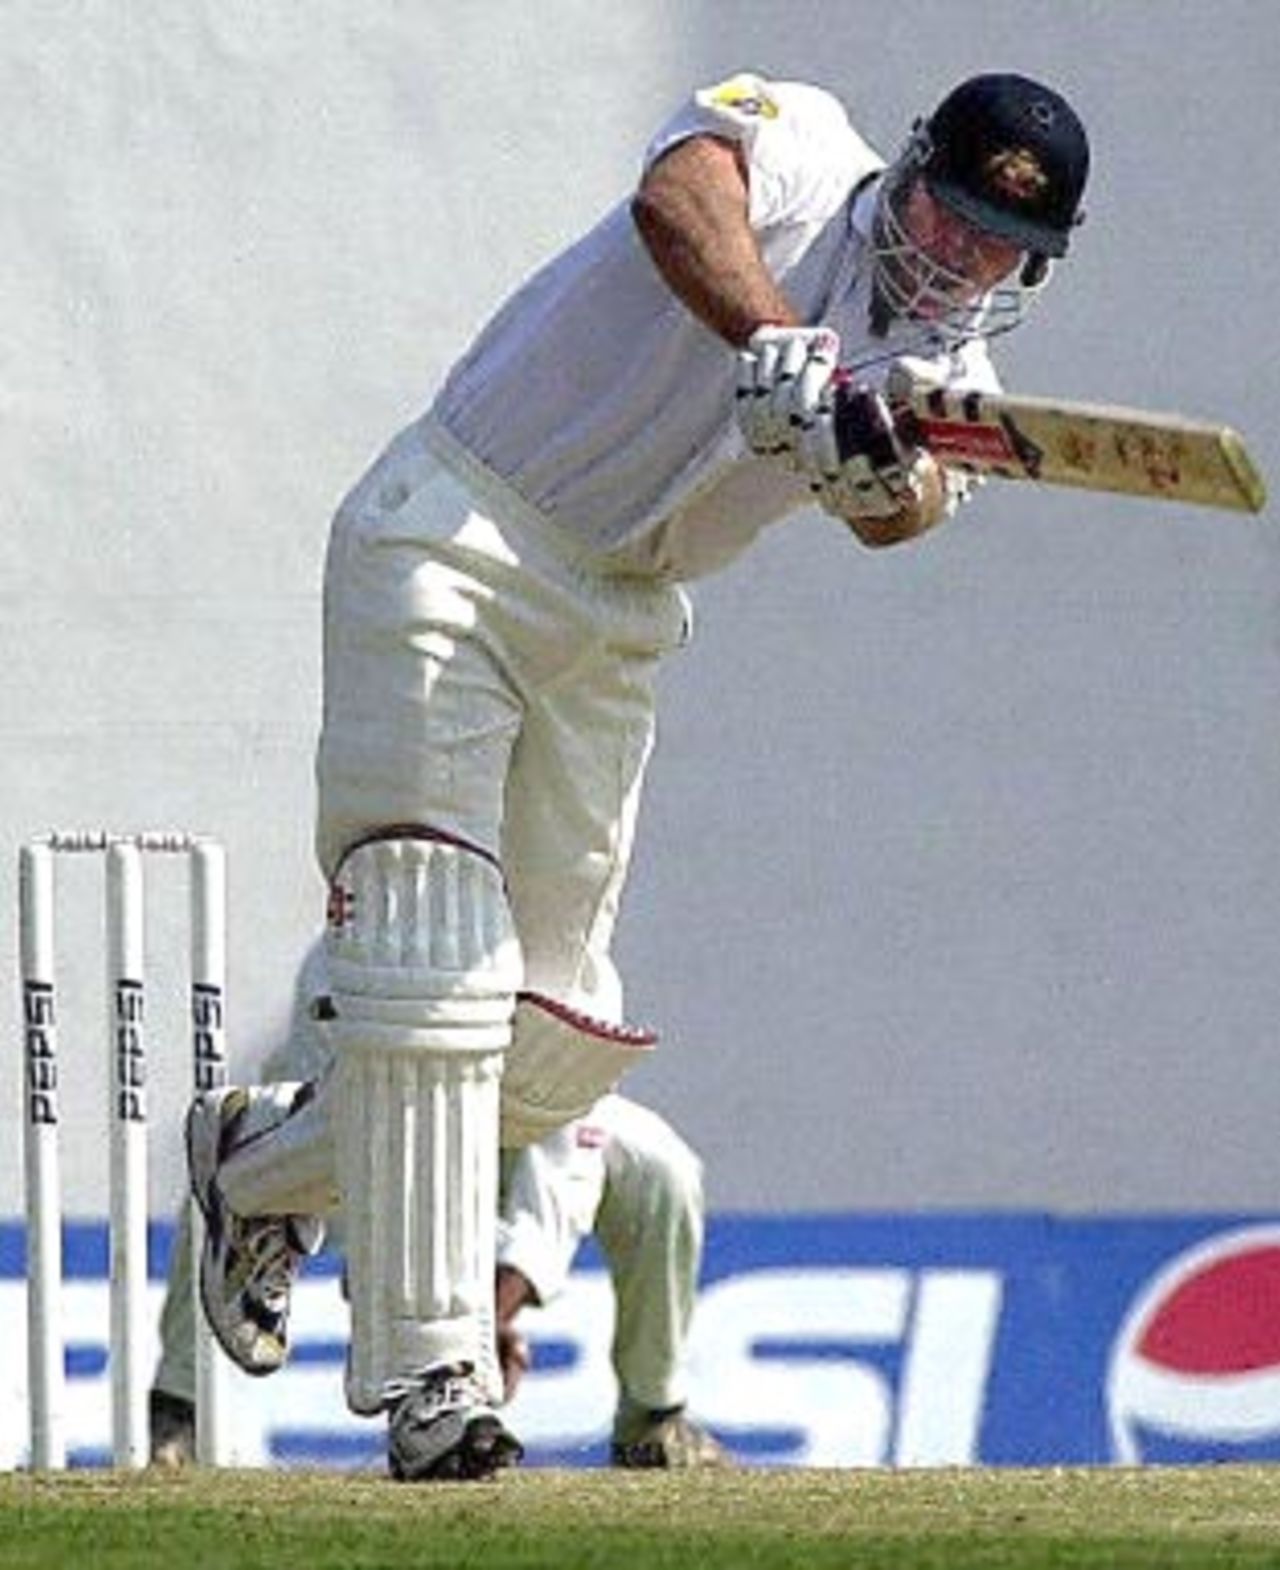 Australian batsman Mathew Hayden hits a ball to the boundary on his way to scoring an unbeaten 41 runs by lunch on the first day of the first three-day test match betwen India and Australia in Nagpur, 17 February 2001. Australia were 119 for 4 by lunch.